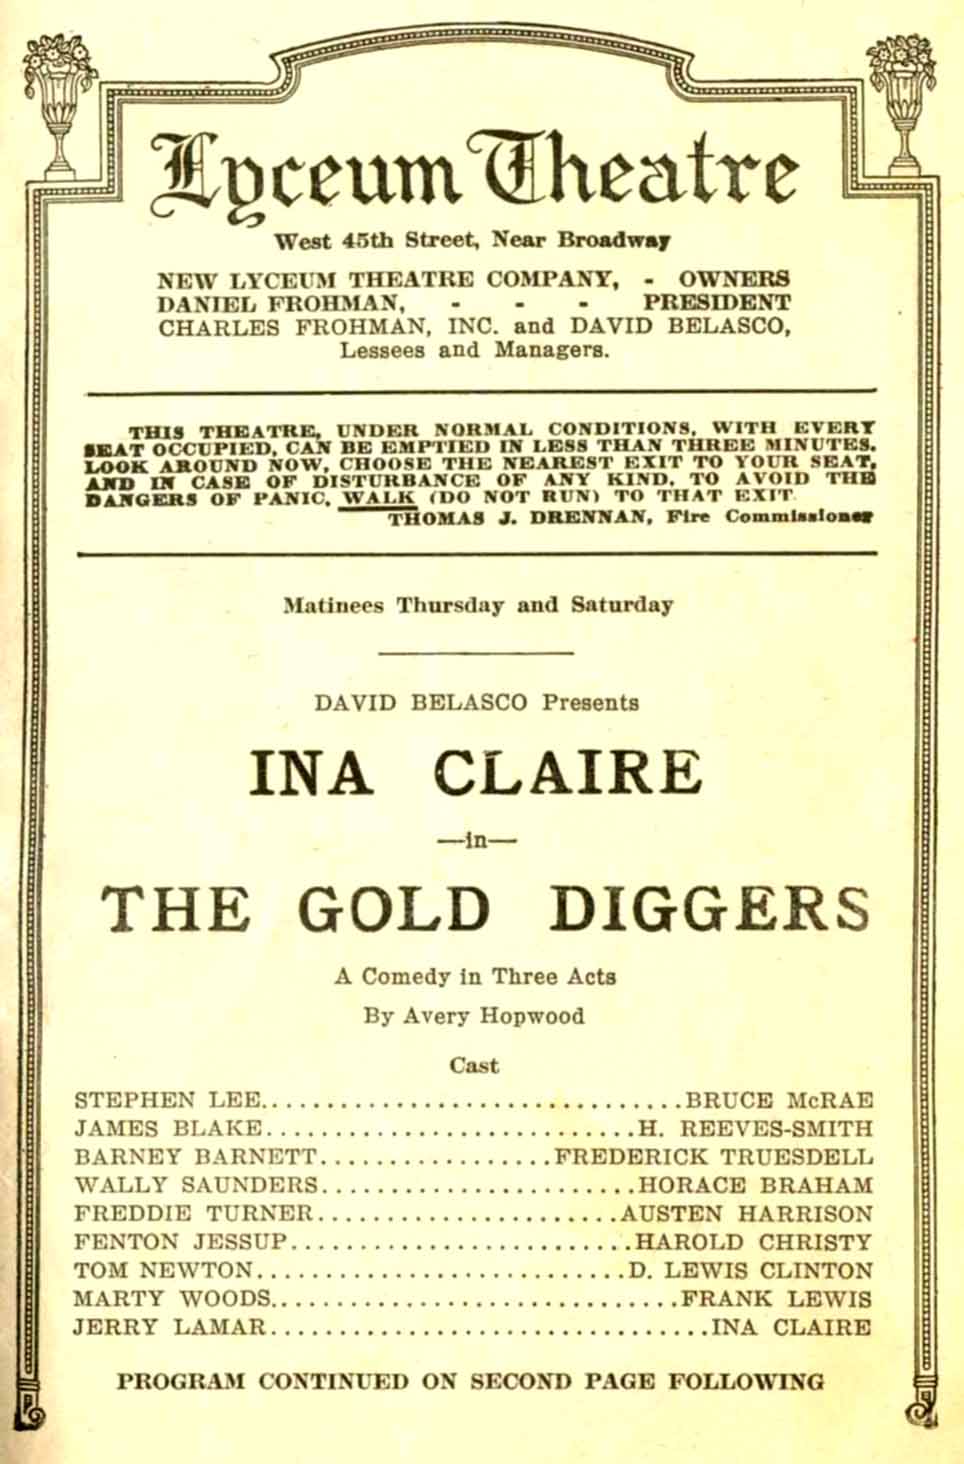 Gold Diggers of 1935 - Wikipedia